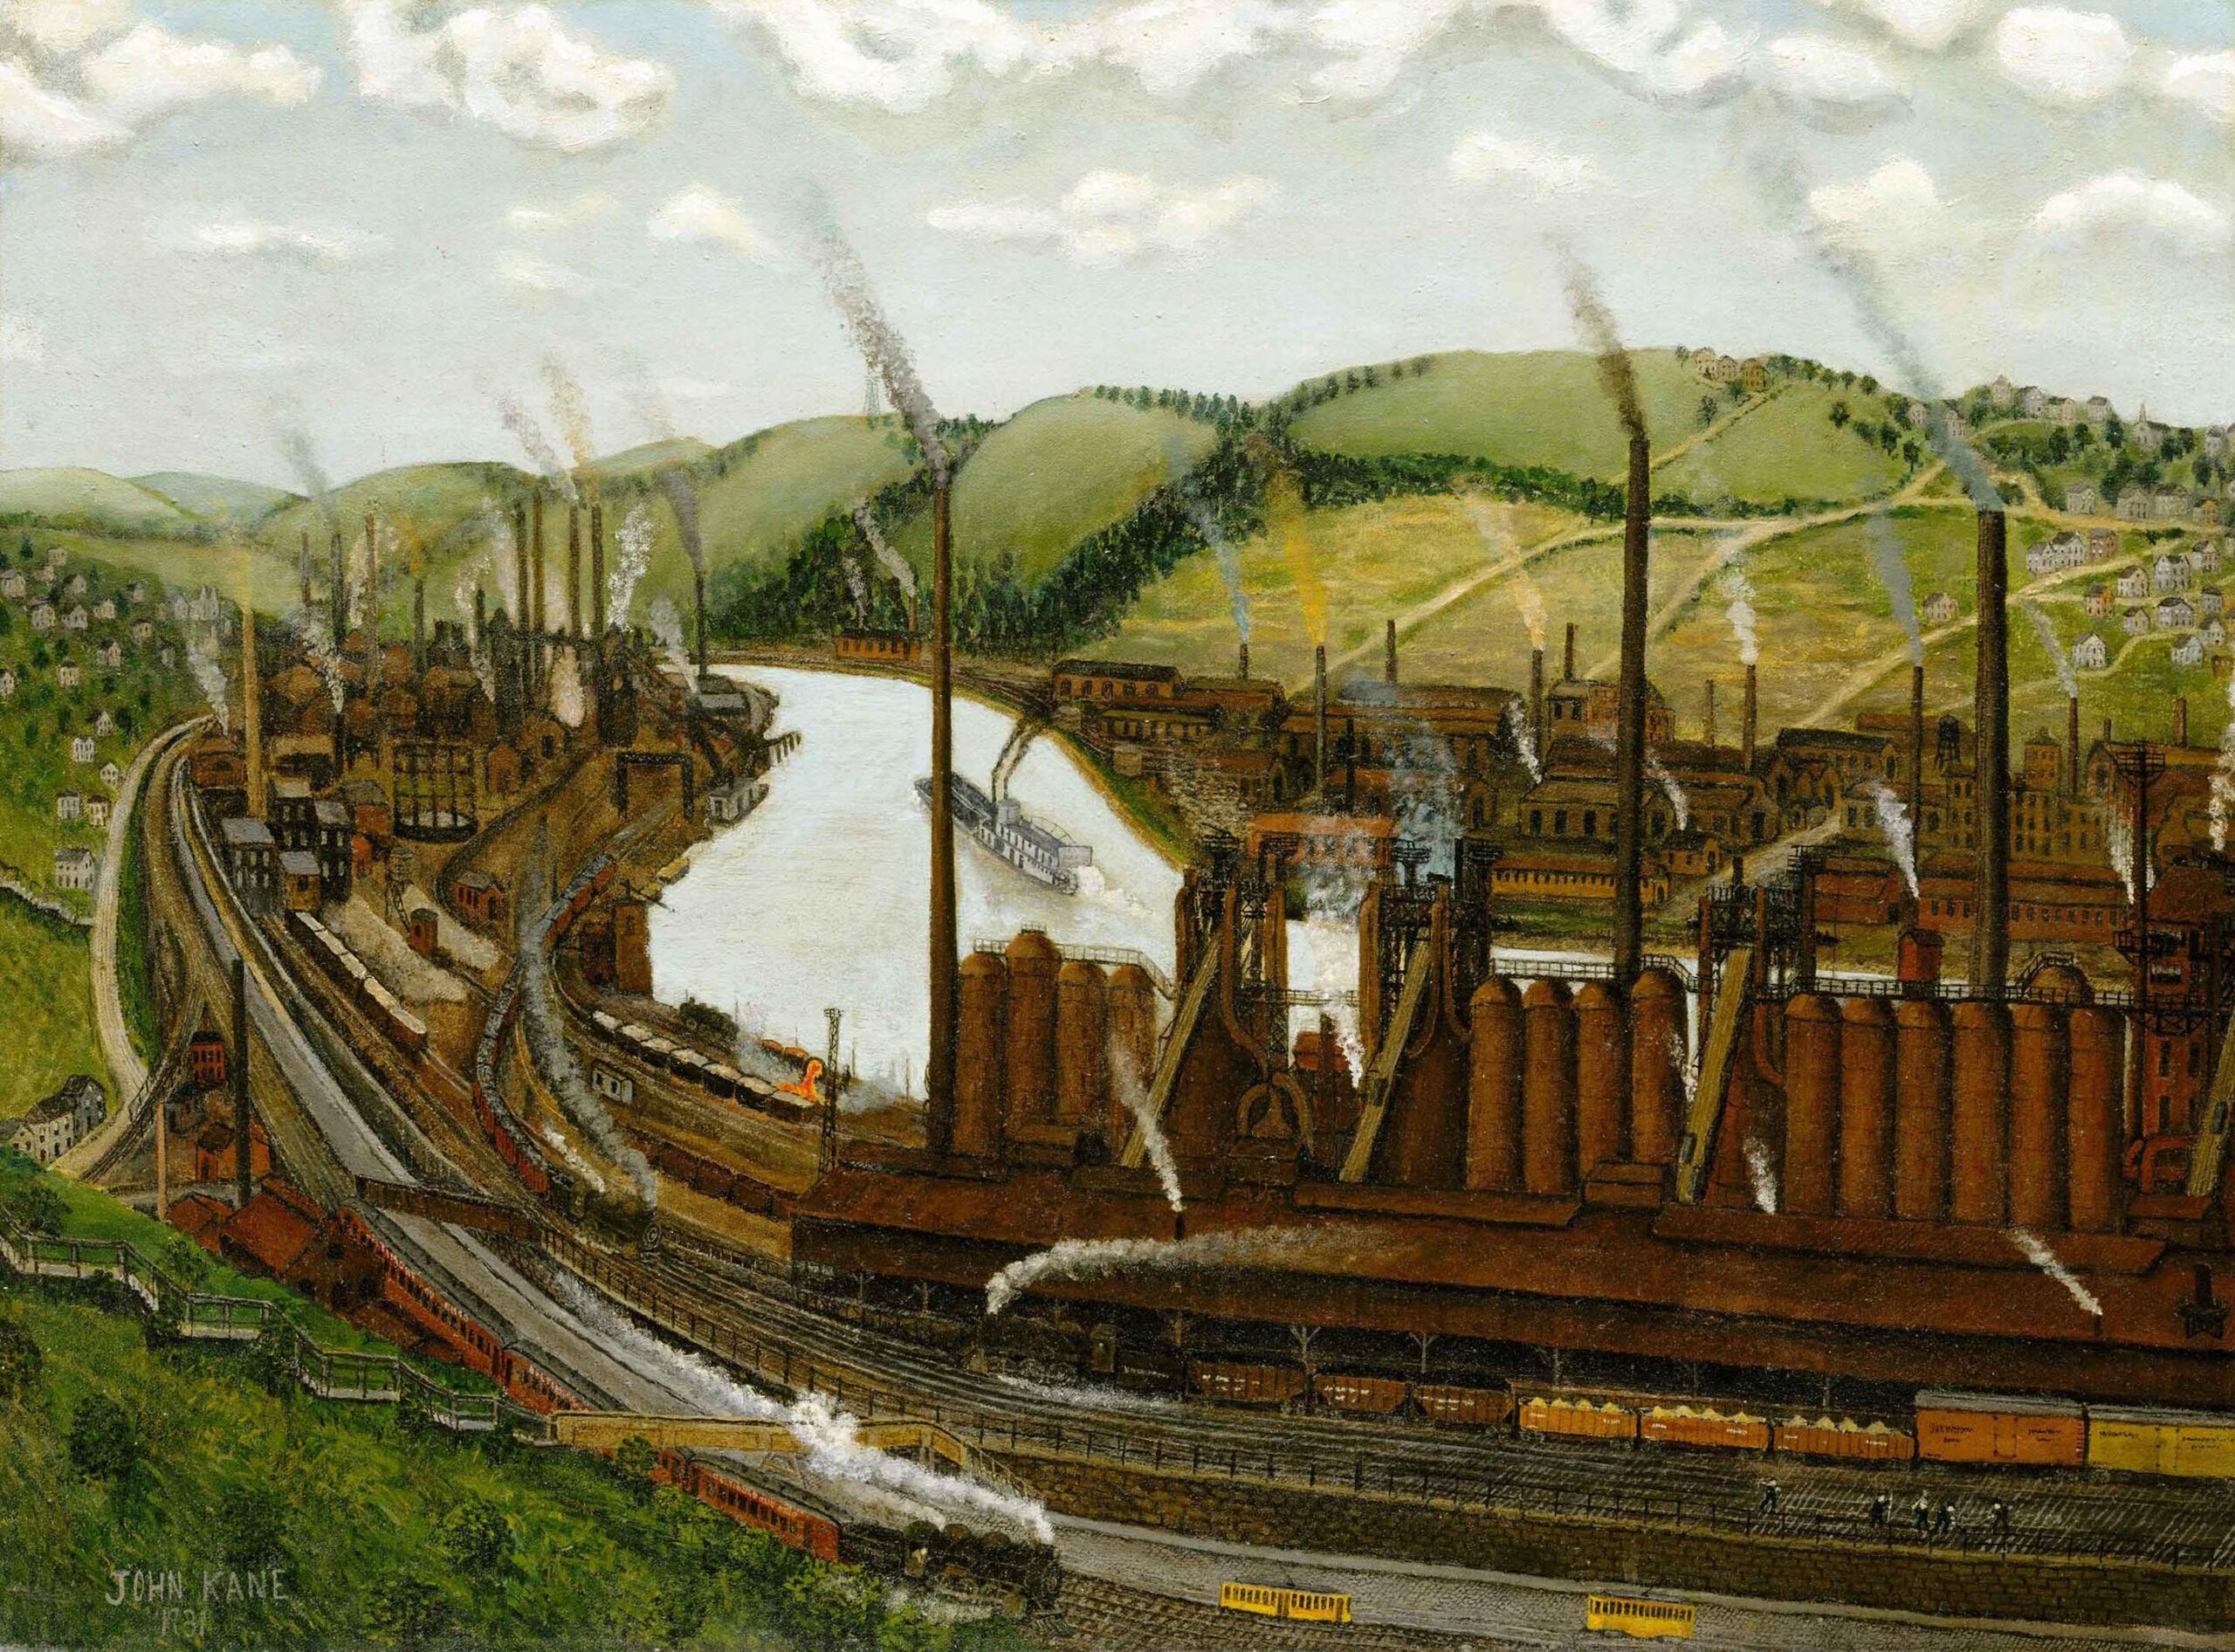 A painting of Pennsylvania's Monongahela River Valley, featuring a river, rolling hills, and a bright sky.